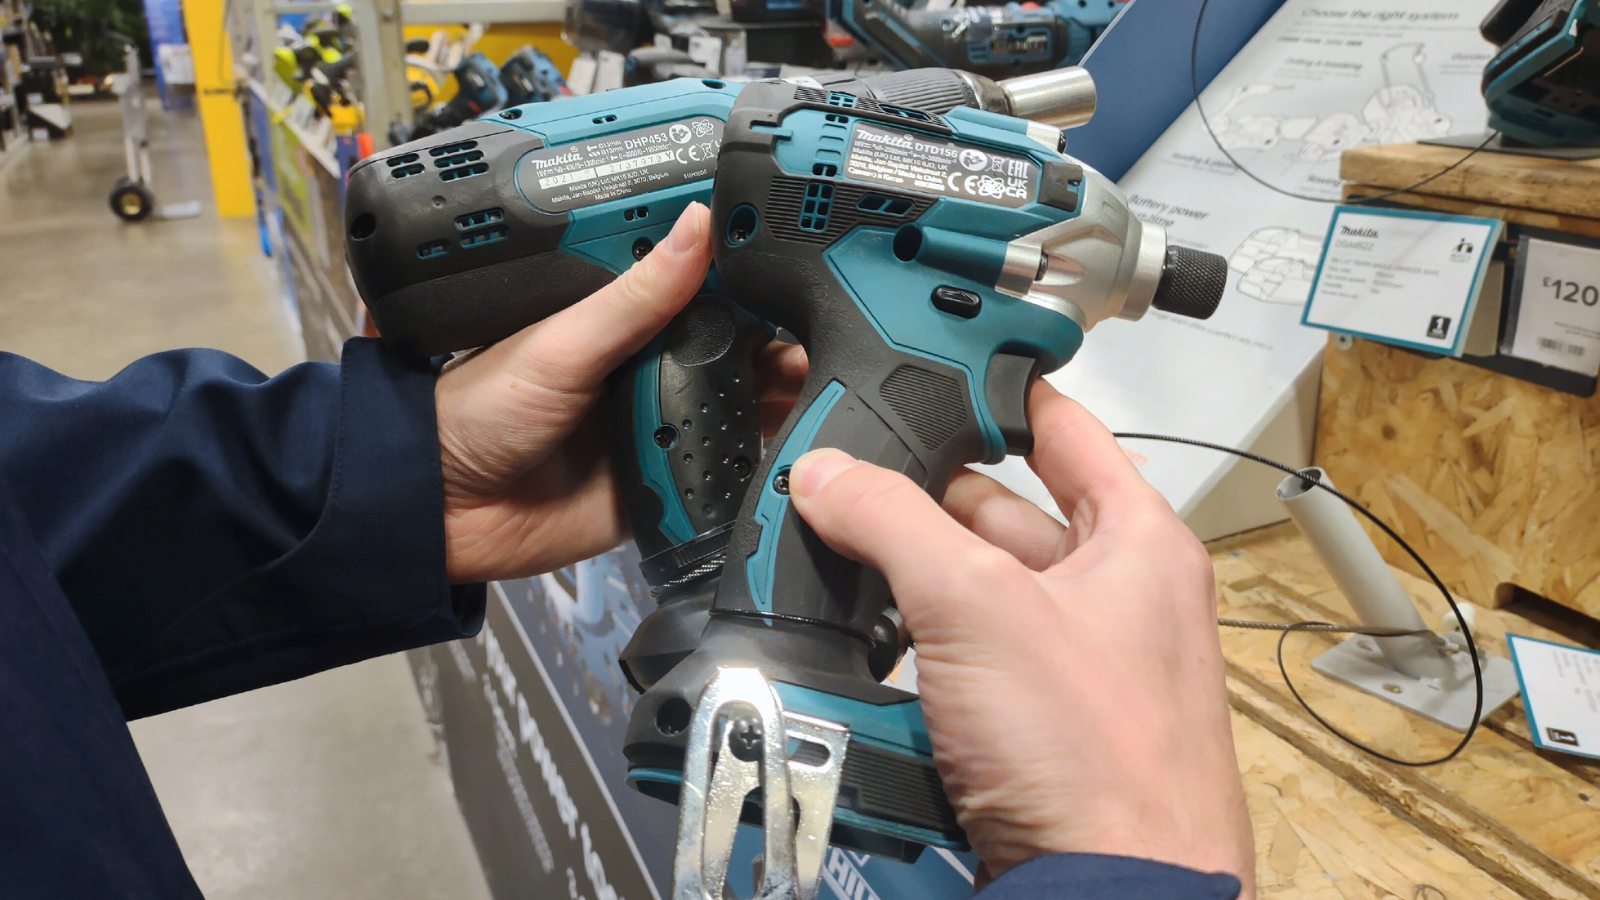 Impact Driver vs Drill: Which to Use & Why (with Chart)